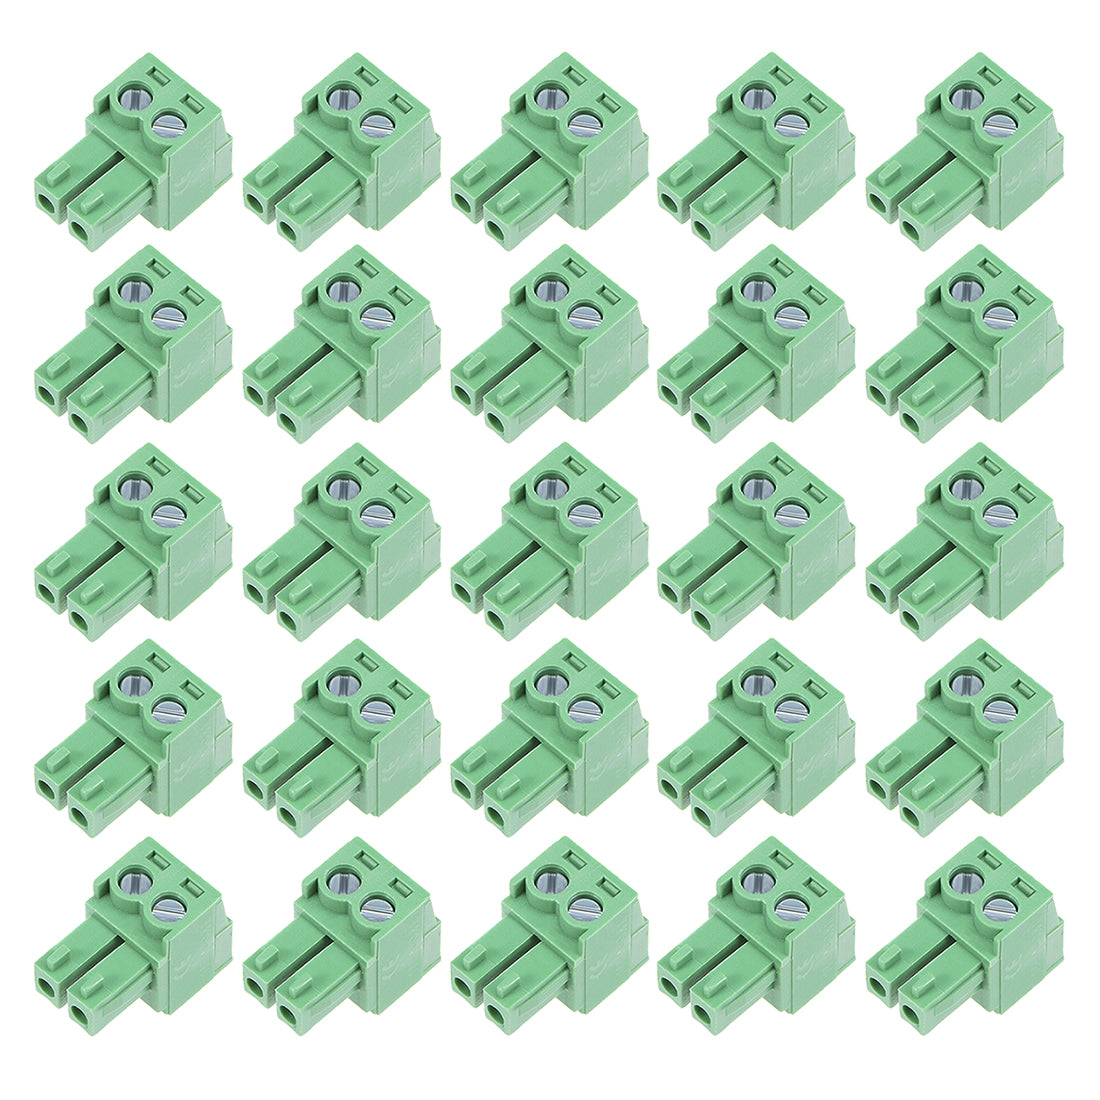 uxcell Uxcell 25Pcs AC300V 10A 3.81mm Pitch 2P Flat Angle Needle Seat Insert-In PCB Terminal Block Connector green